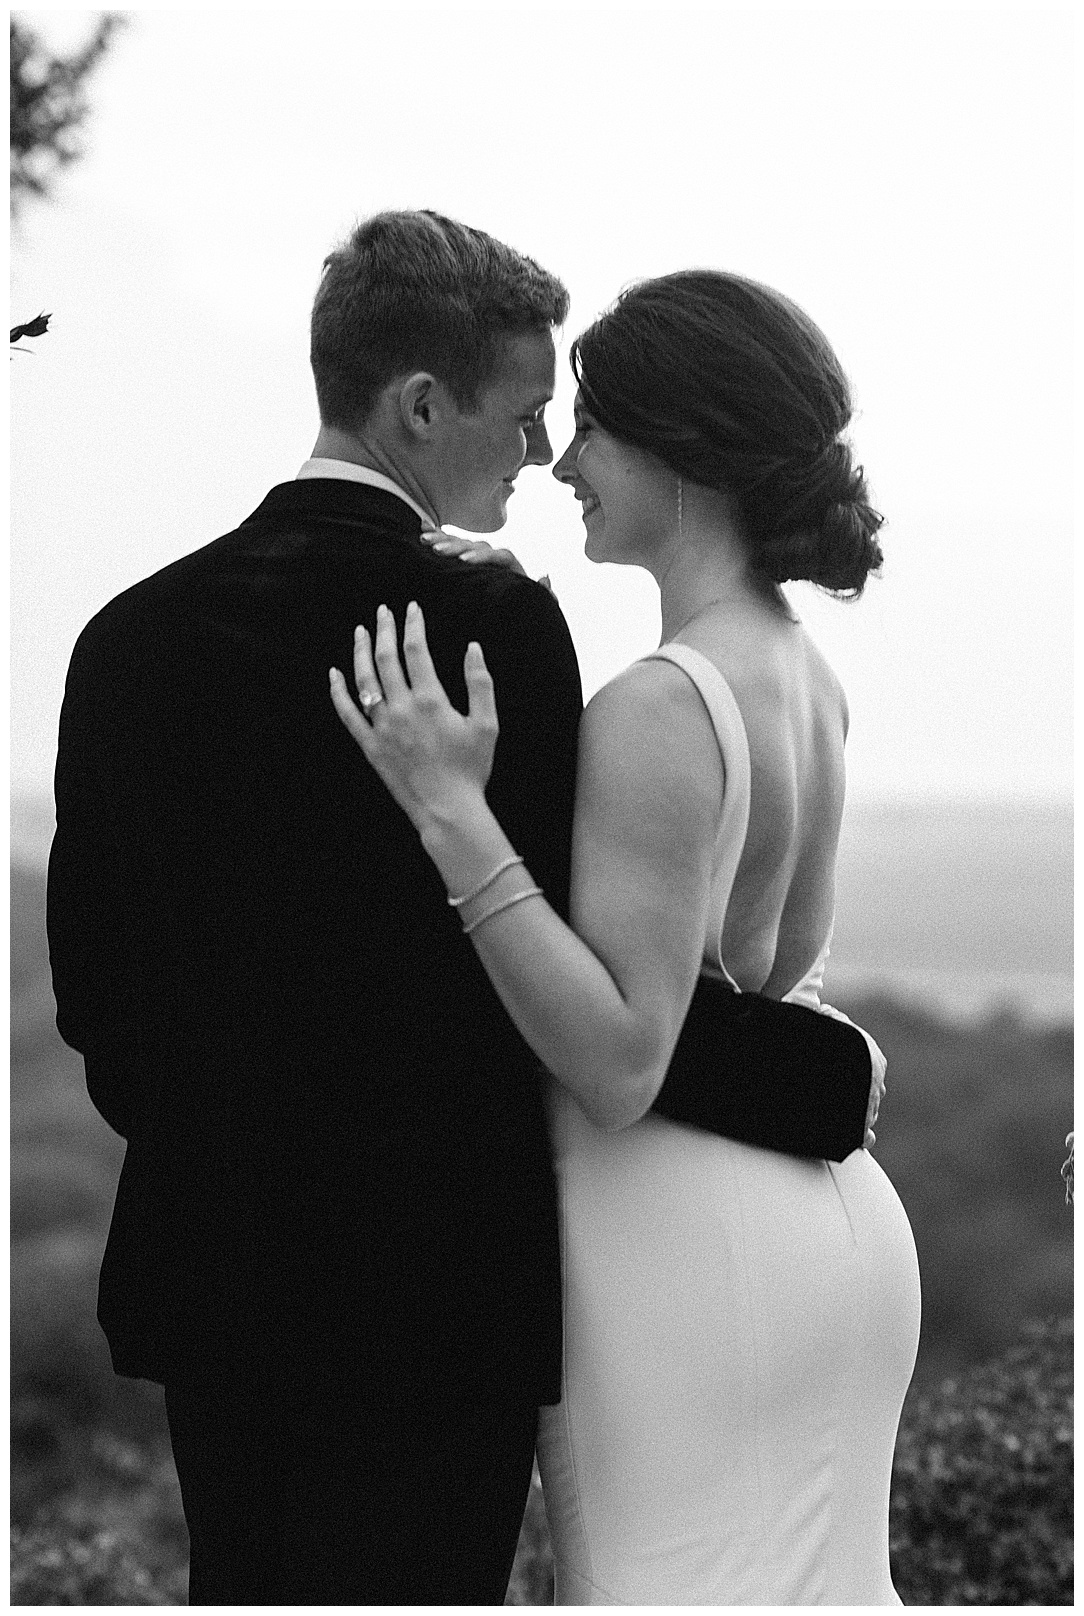 romantic black and white photo of wedding couple from behind